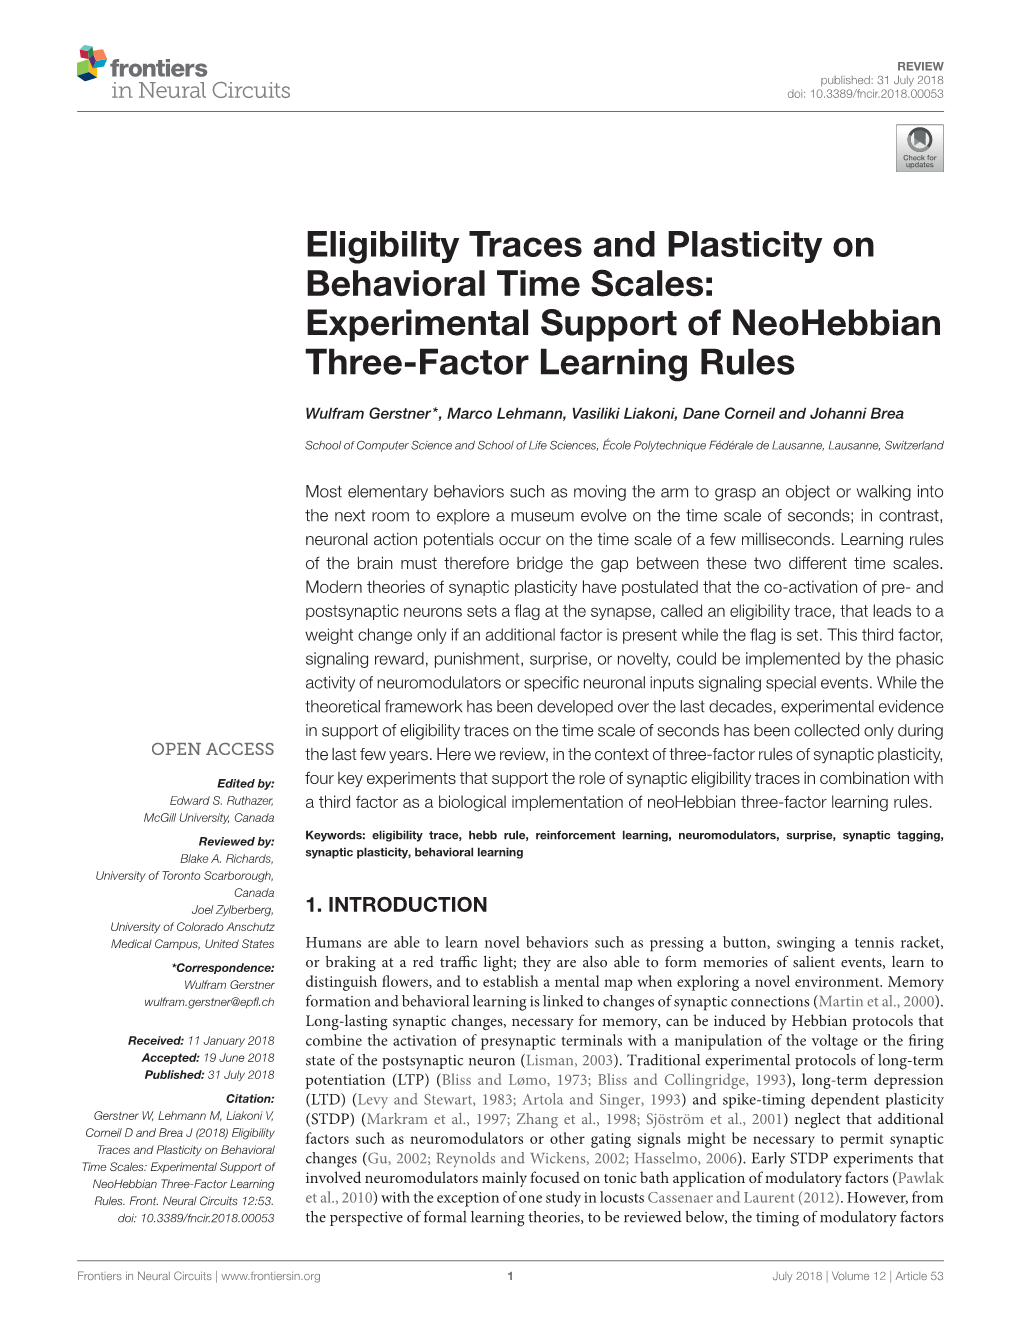 Eligibility Traces and Plasticity on Behavioral Time Scales: Experimental Support of Neohebbian Three-Factor Learning Rules